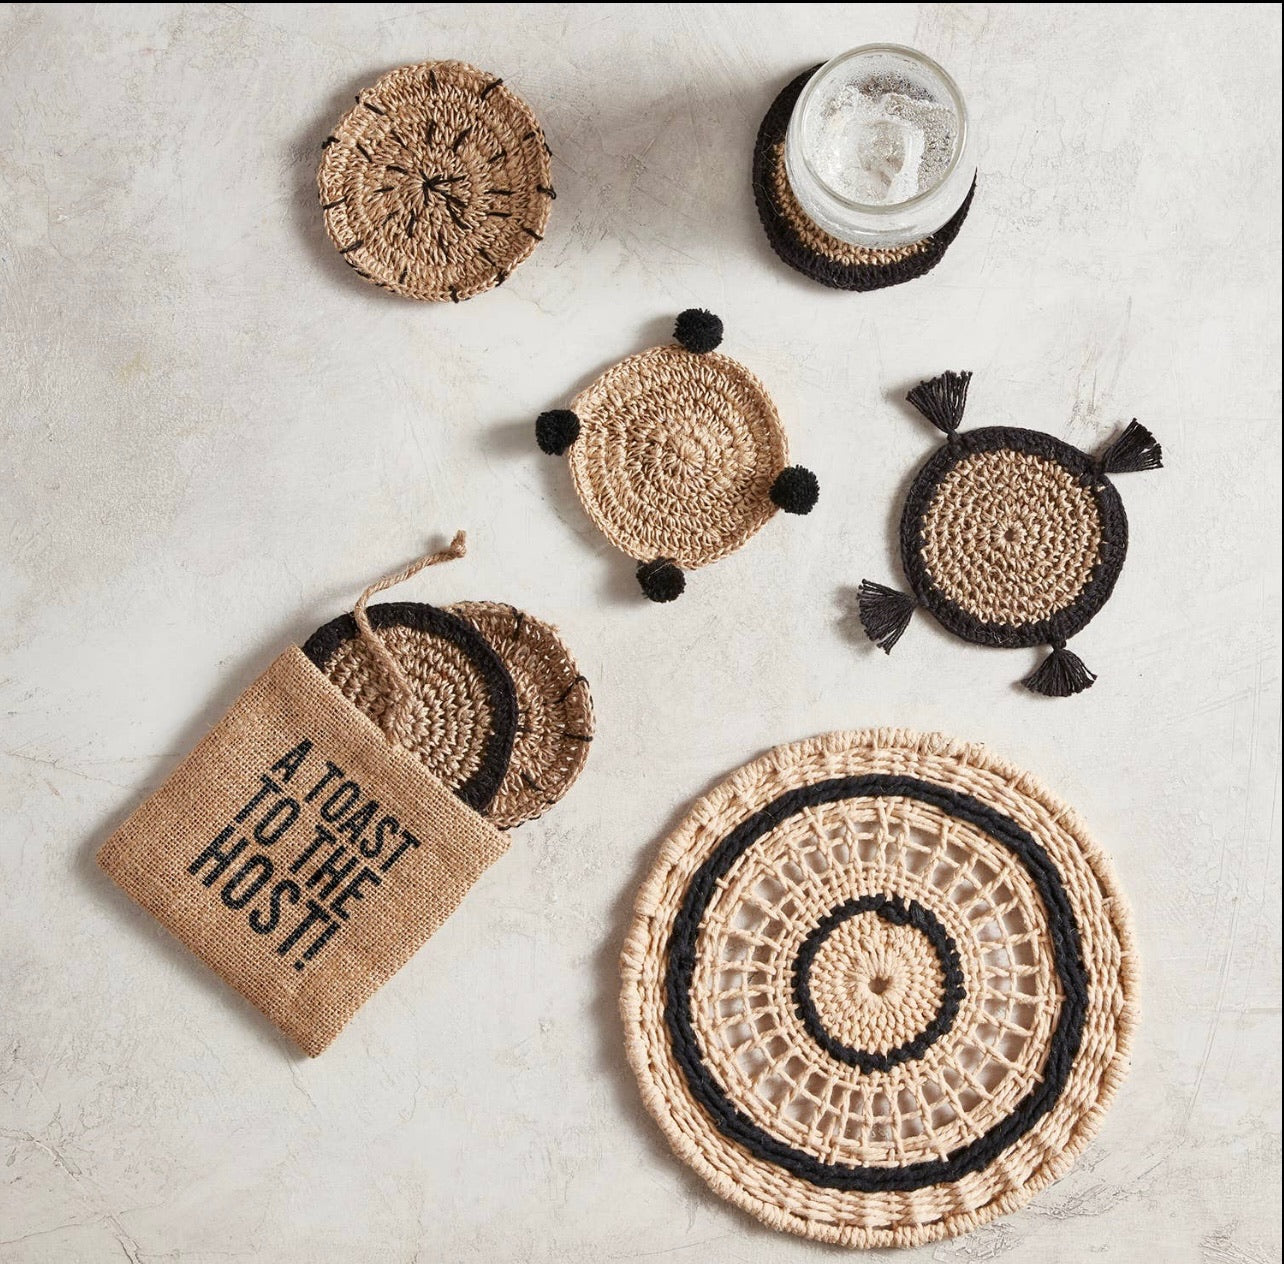 Seagrass Coasters With Burlap Bag